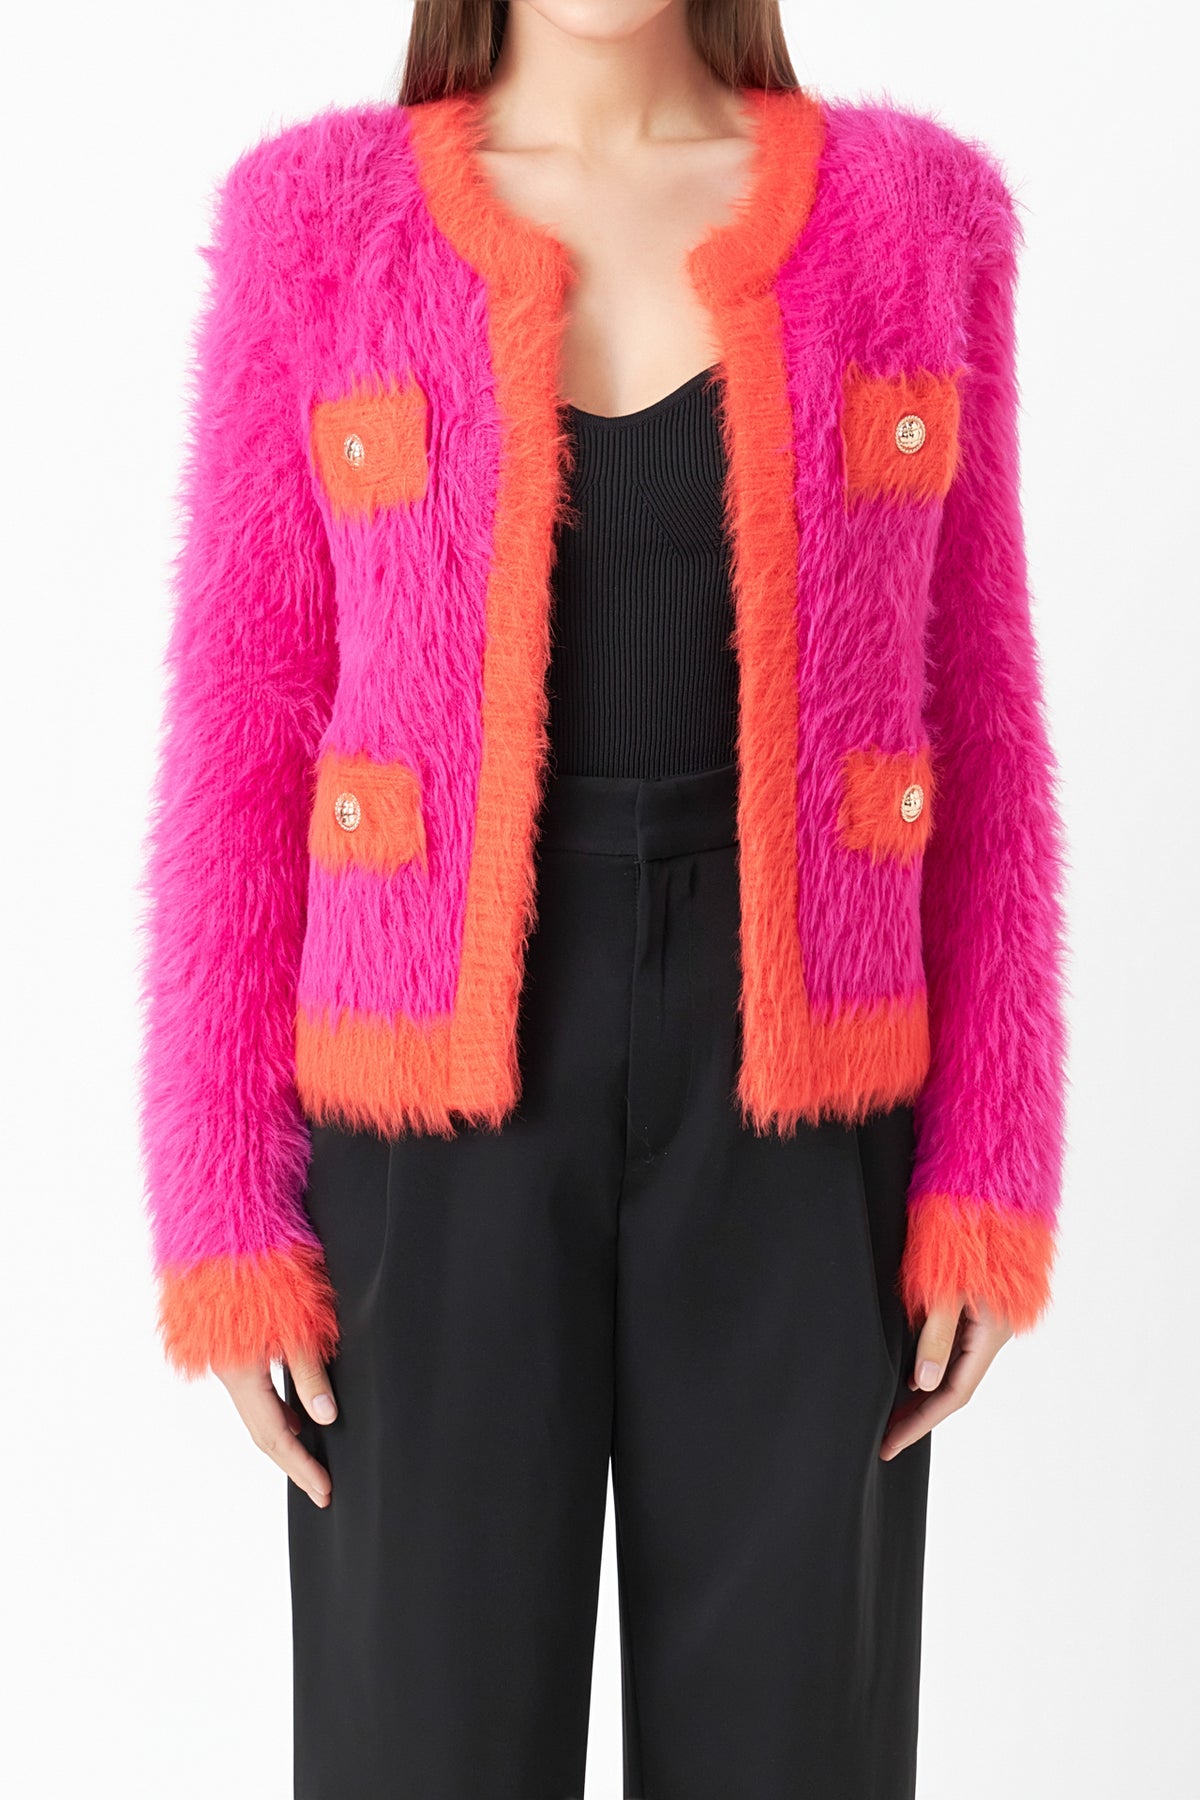 ENDLESS ROSE - Fuzzy Cardigan - CARDIGANS available at Objectrare